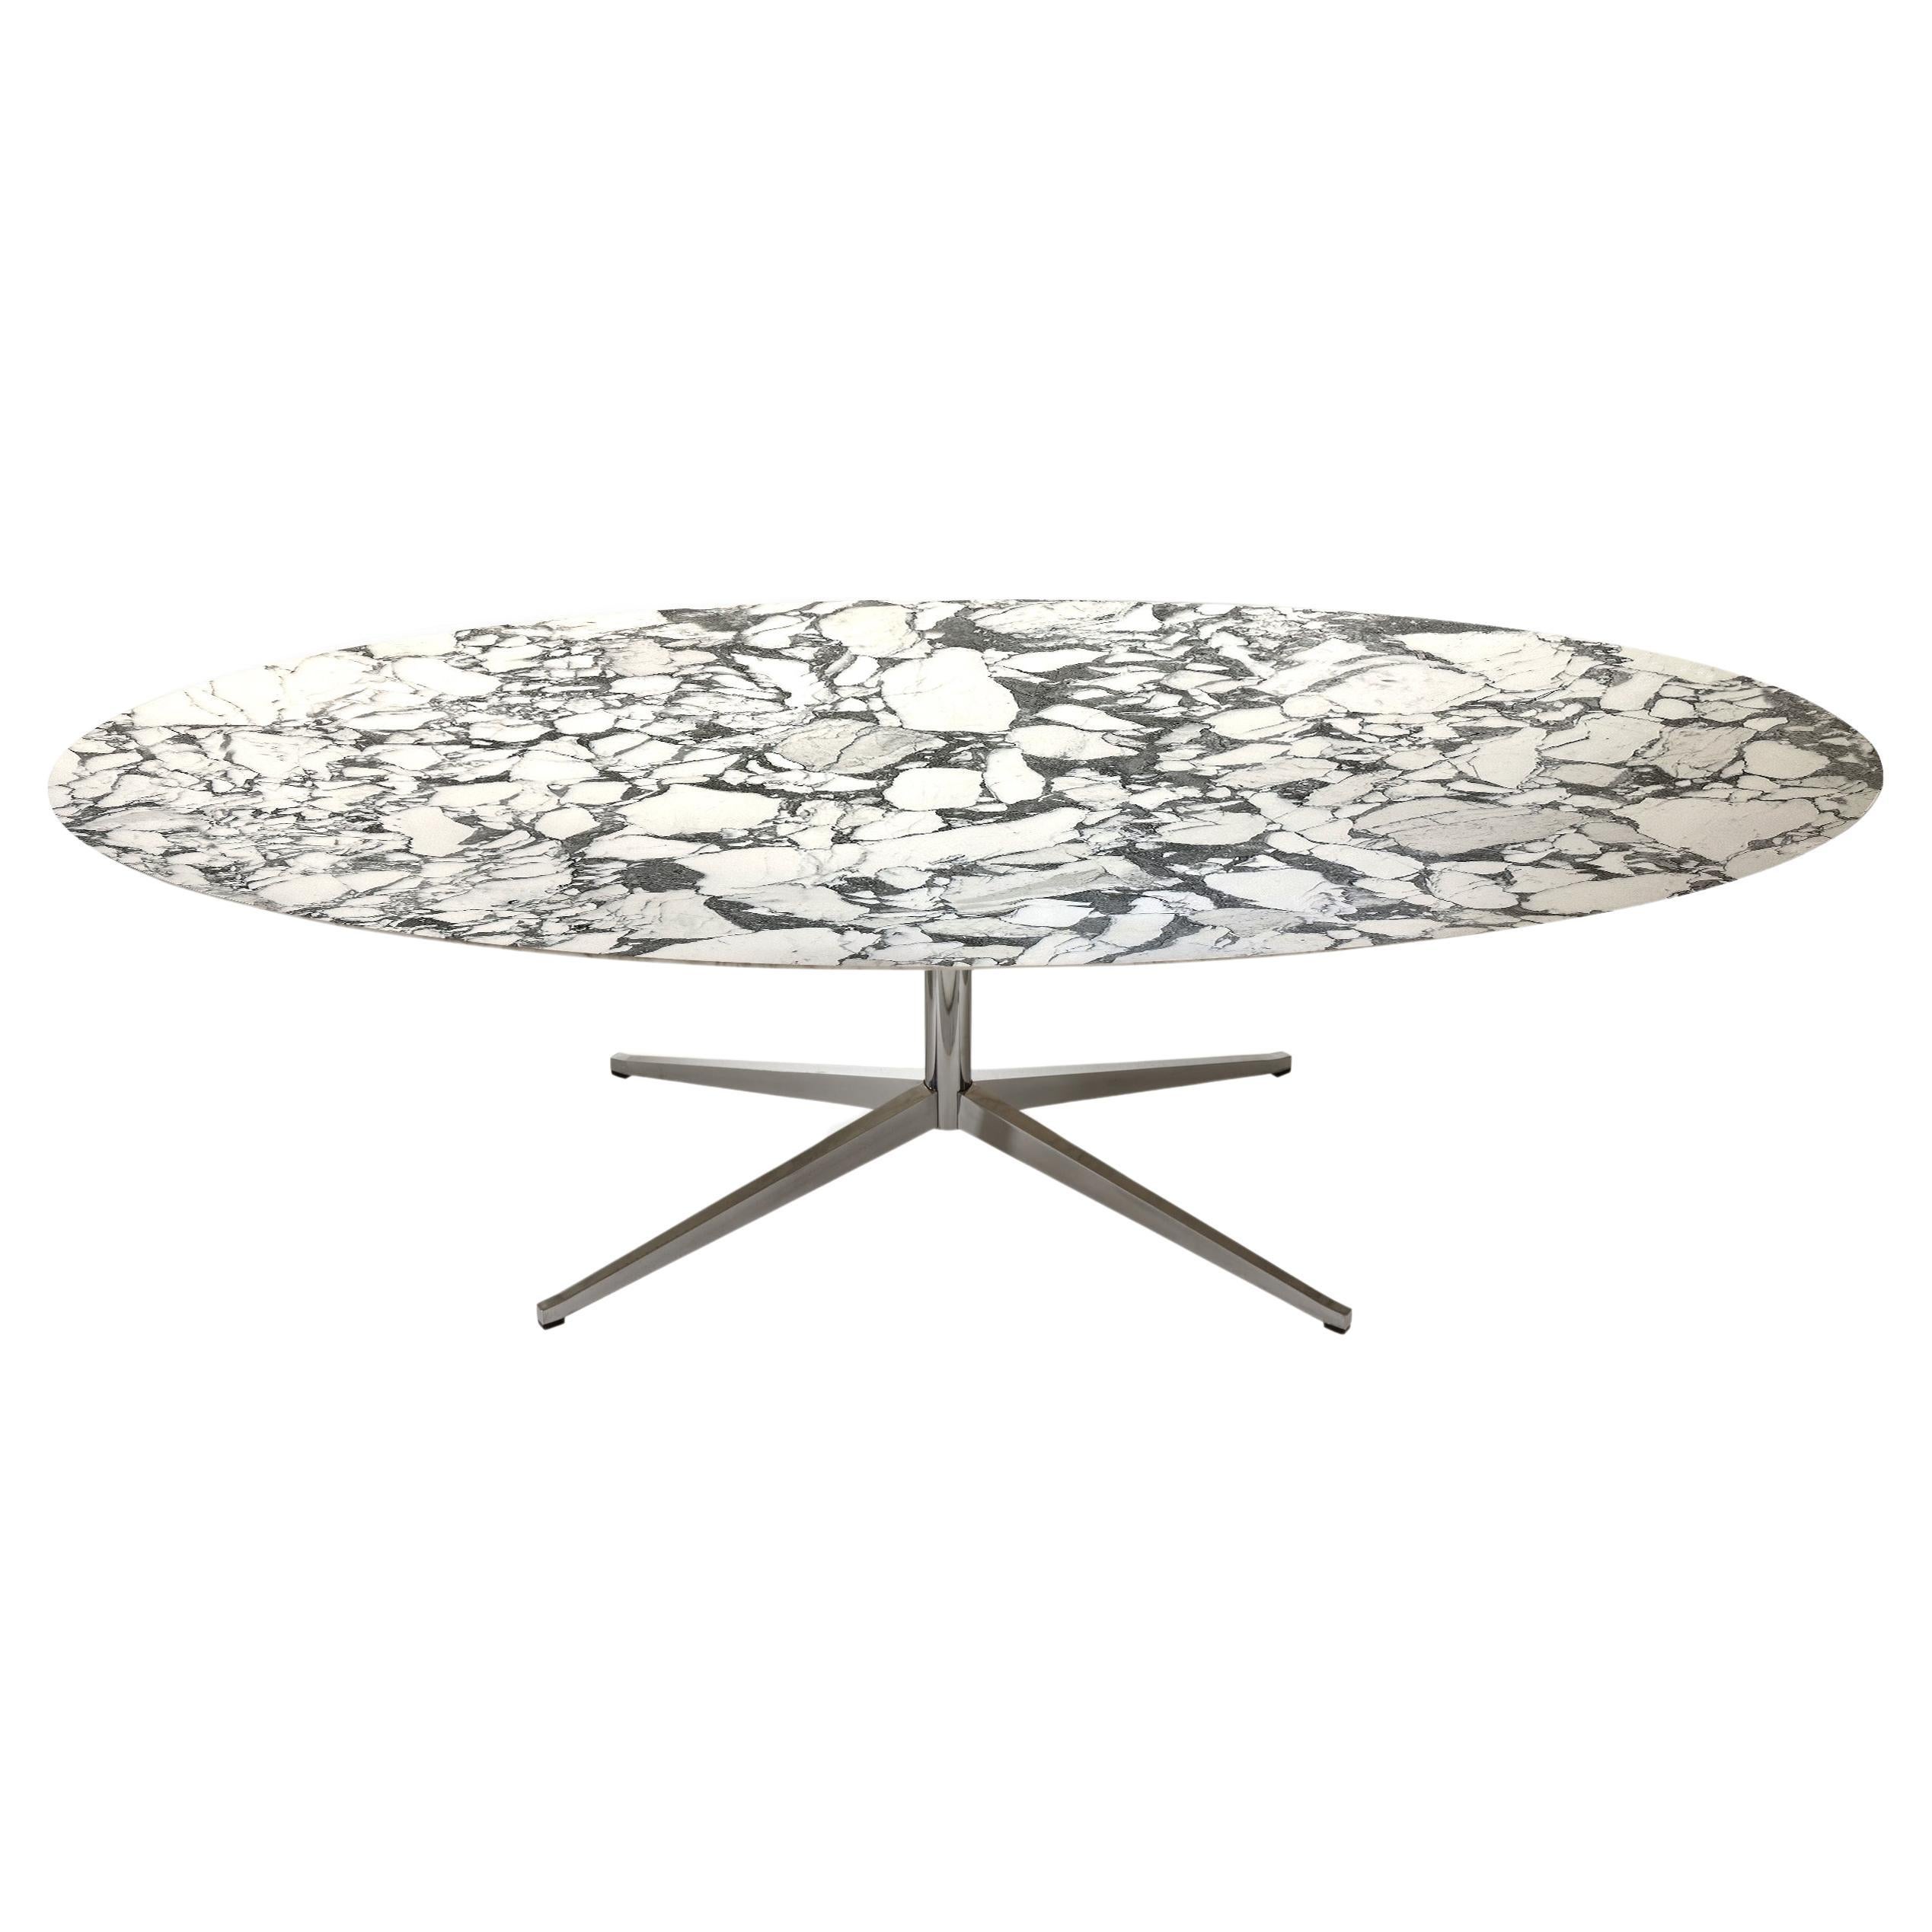 Large oval table in marble and chrome by Florence Knoll Knoll Intl US circa 1961